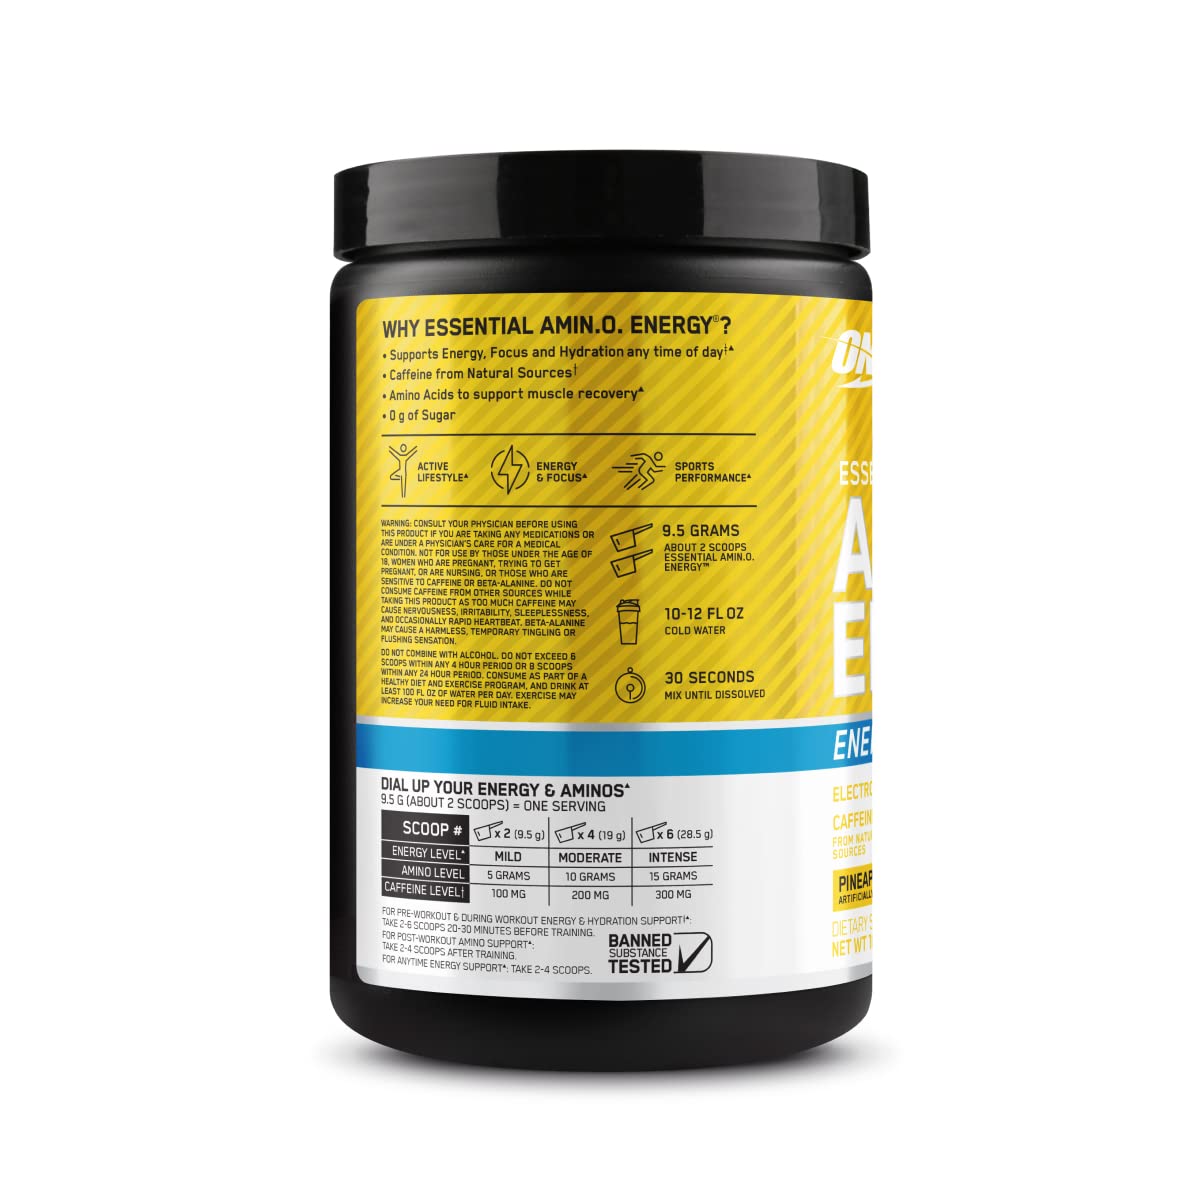 Optimum Nutrition Amino Energy Plus Electrolytes Energy Drink Powder, Caffeine for Pre-Workout Energy, Amino Acids/BCAAs for Post-Workout Recovery, Pineapple Twist, 30 Servings- Packaging May Vary